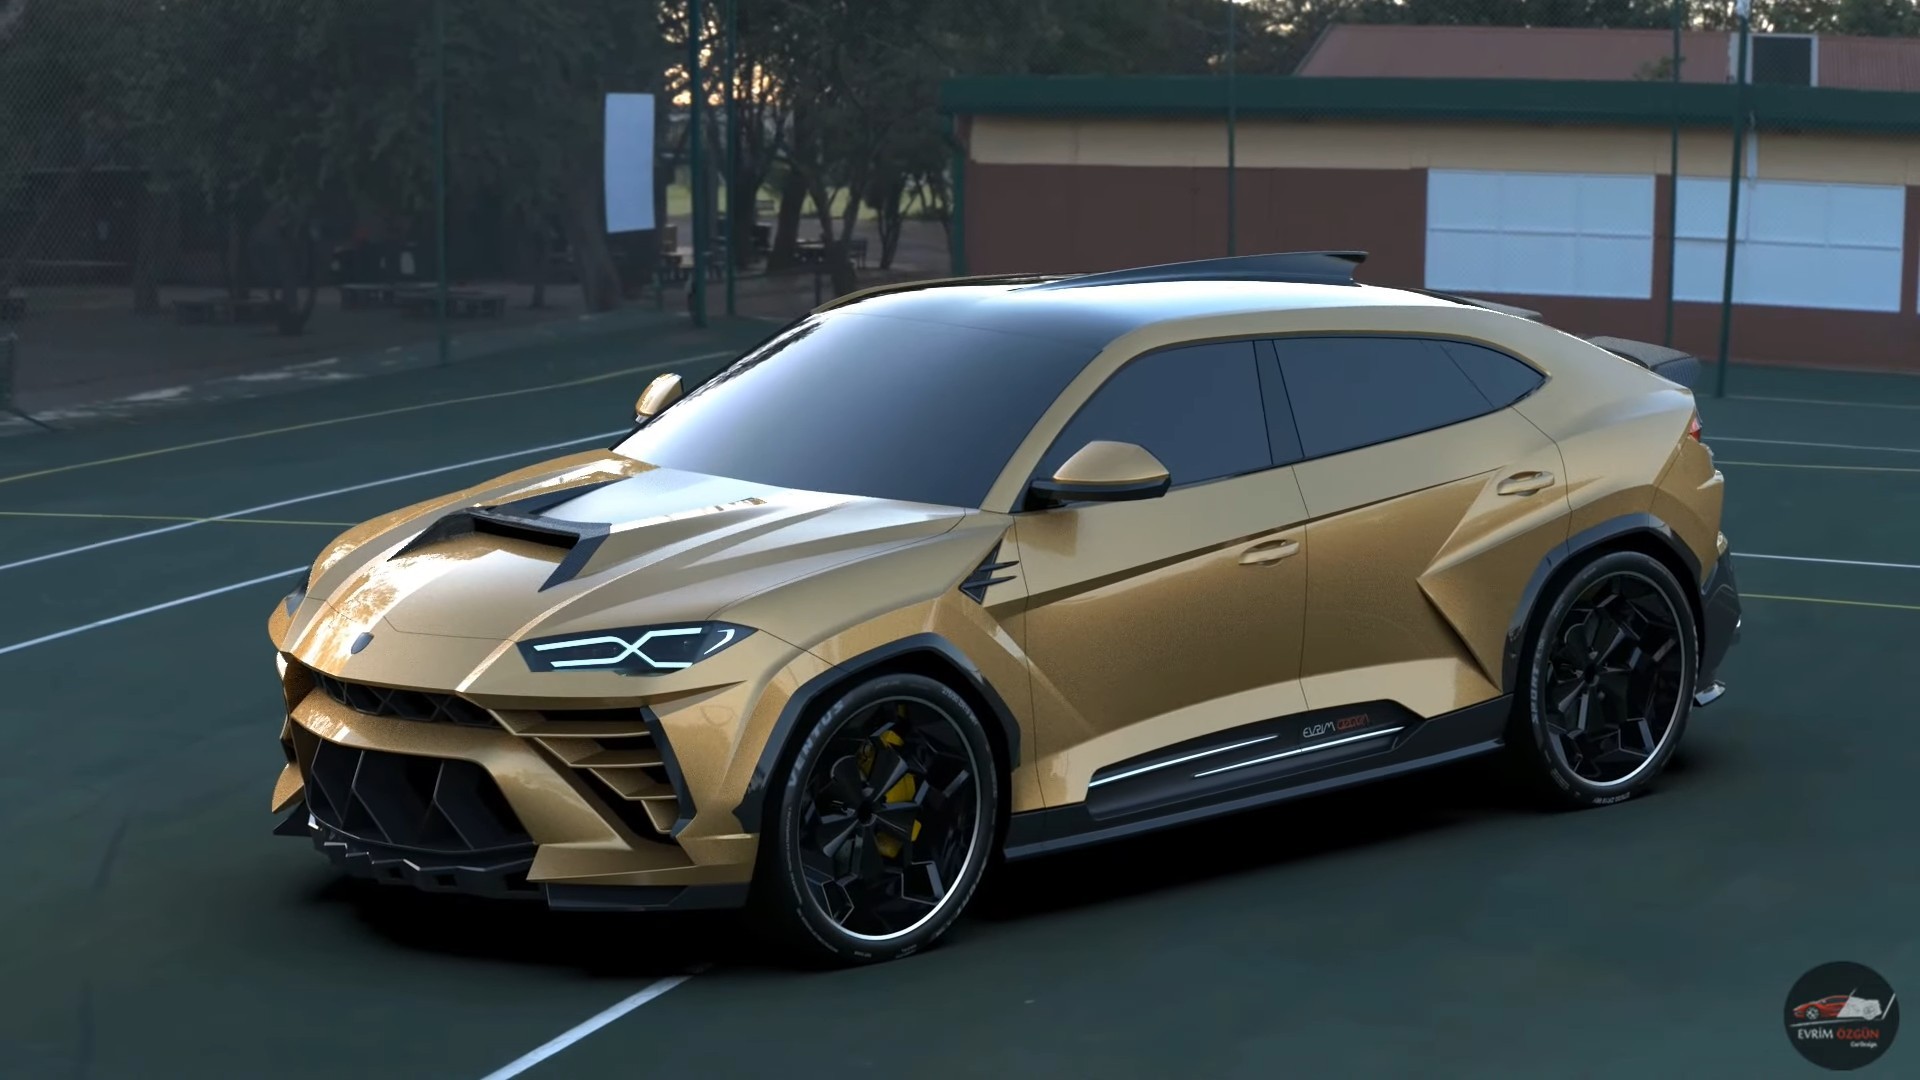 https://s1.cdn.autoevolution.com/images/news/gallery/2024-lambo-urus-has-a-curious-case-of-virtual-tuning-looks-ready-for-the-widebody-arena_32.jpg